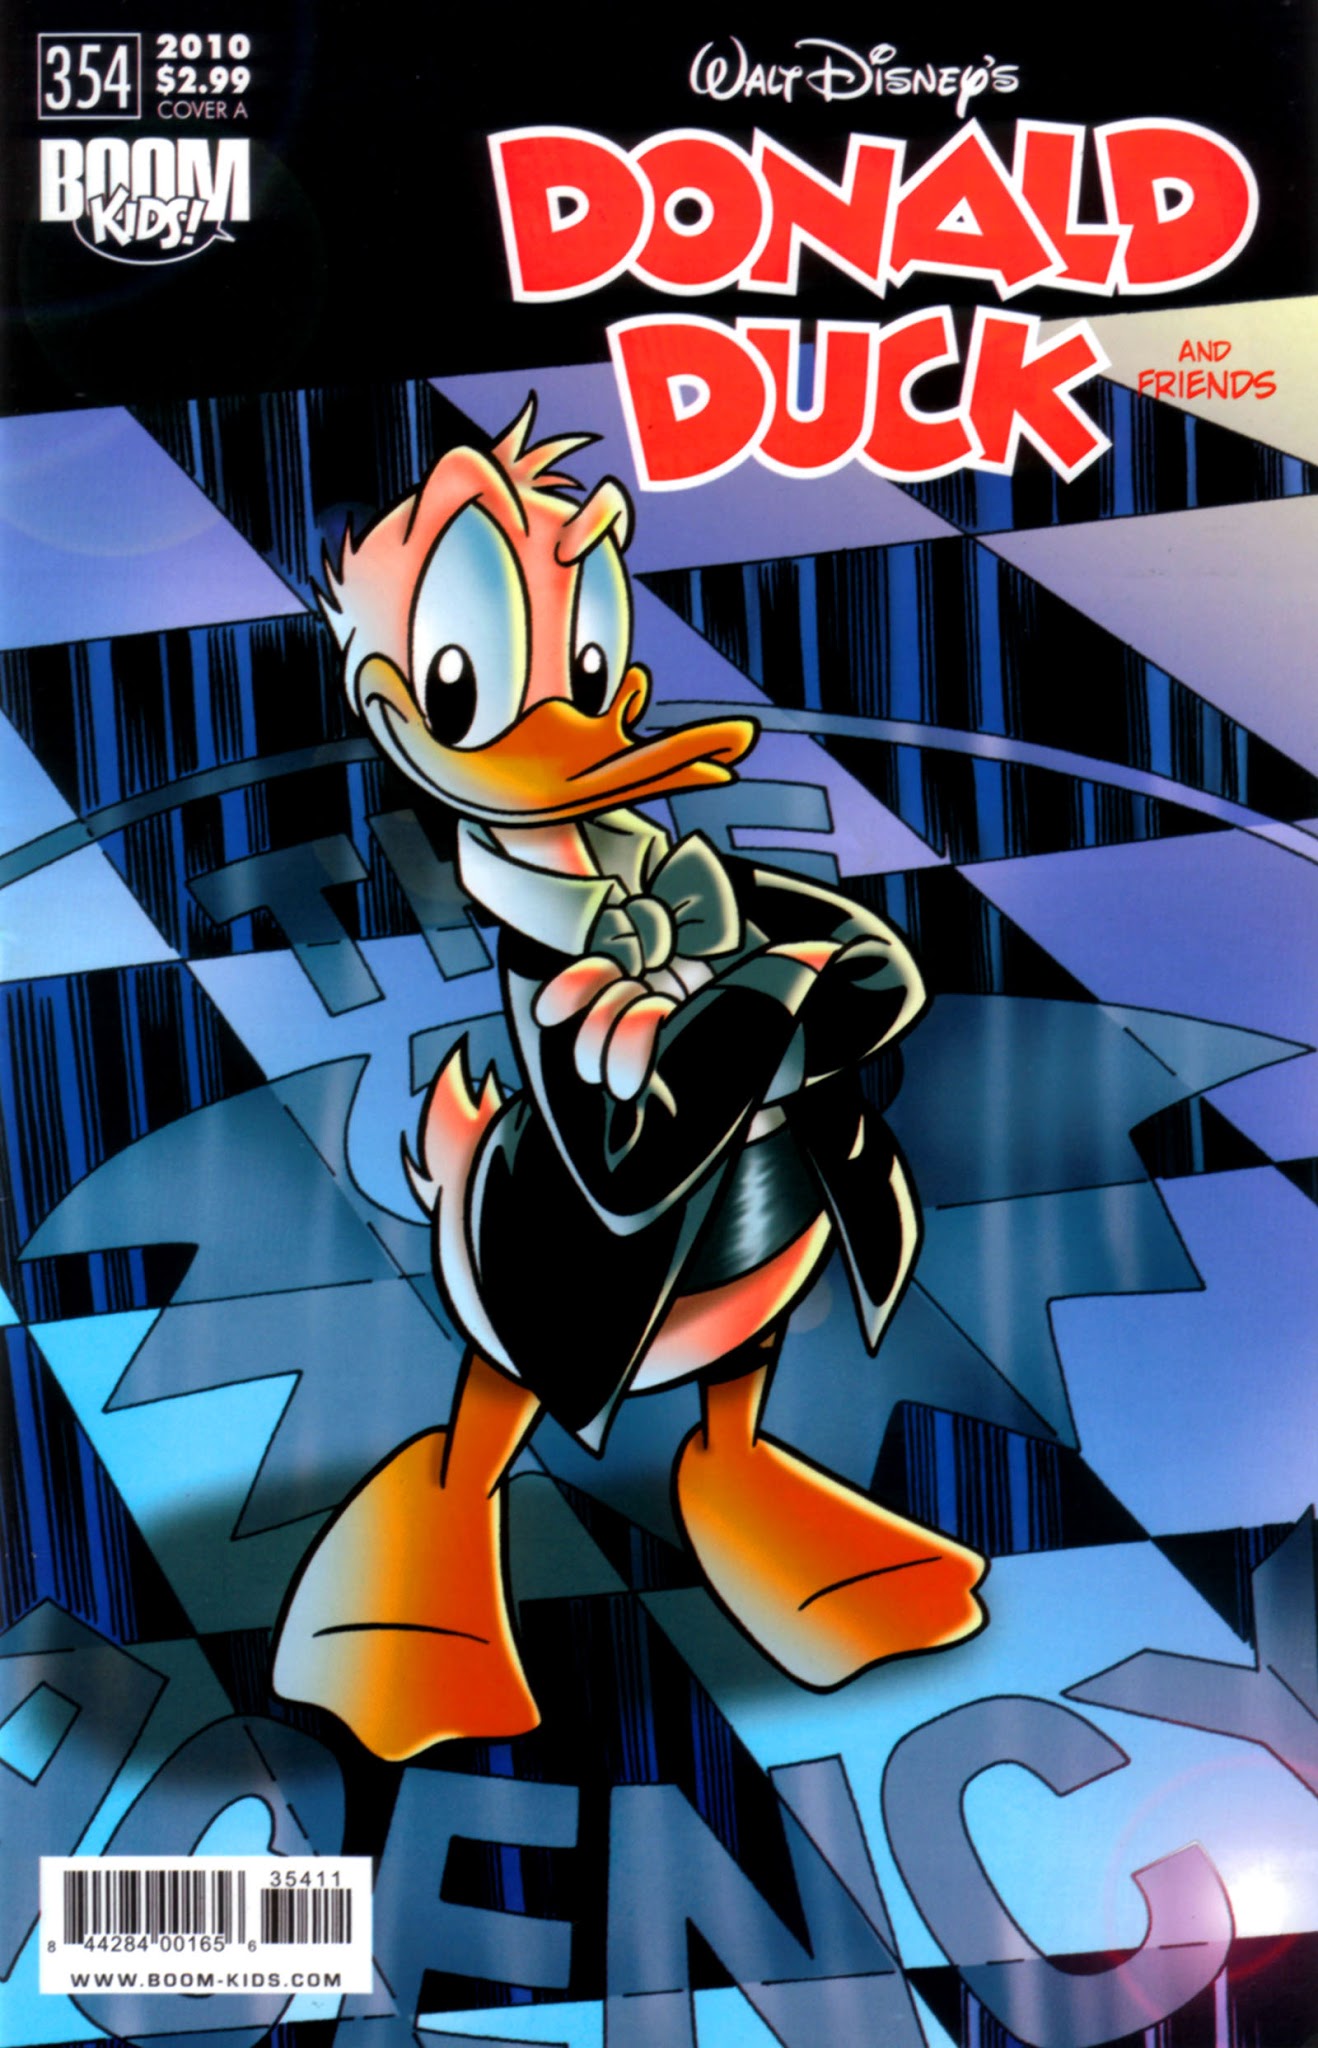 Read online Donald Duck and Friends comic -  Issue #354 - 1